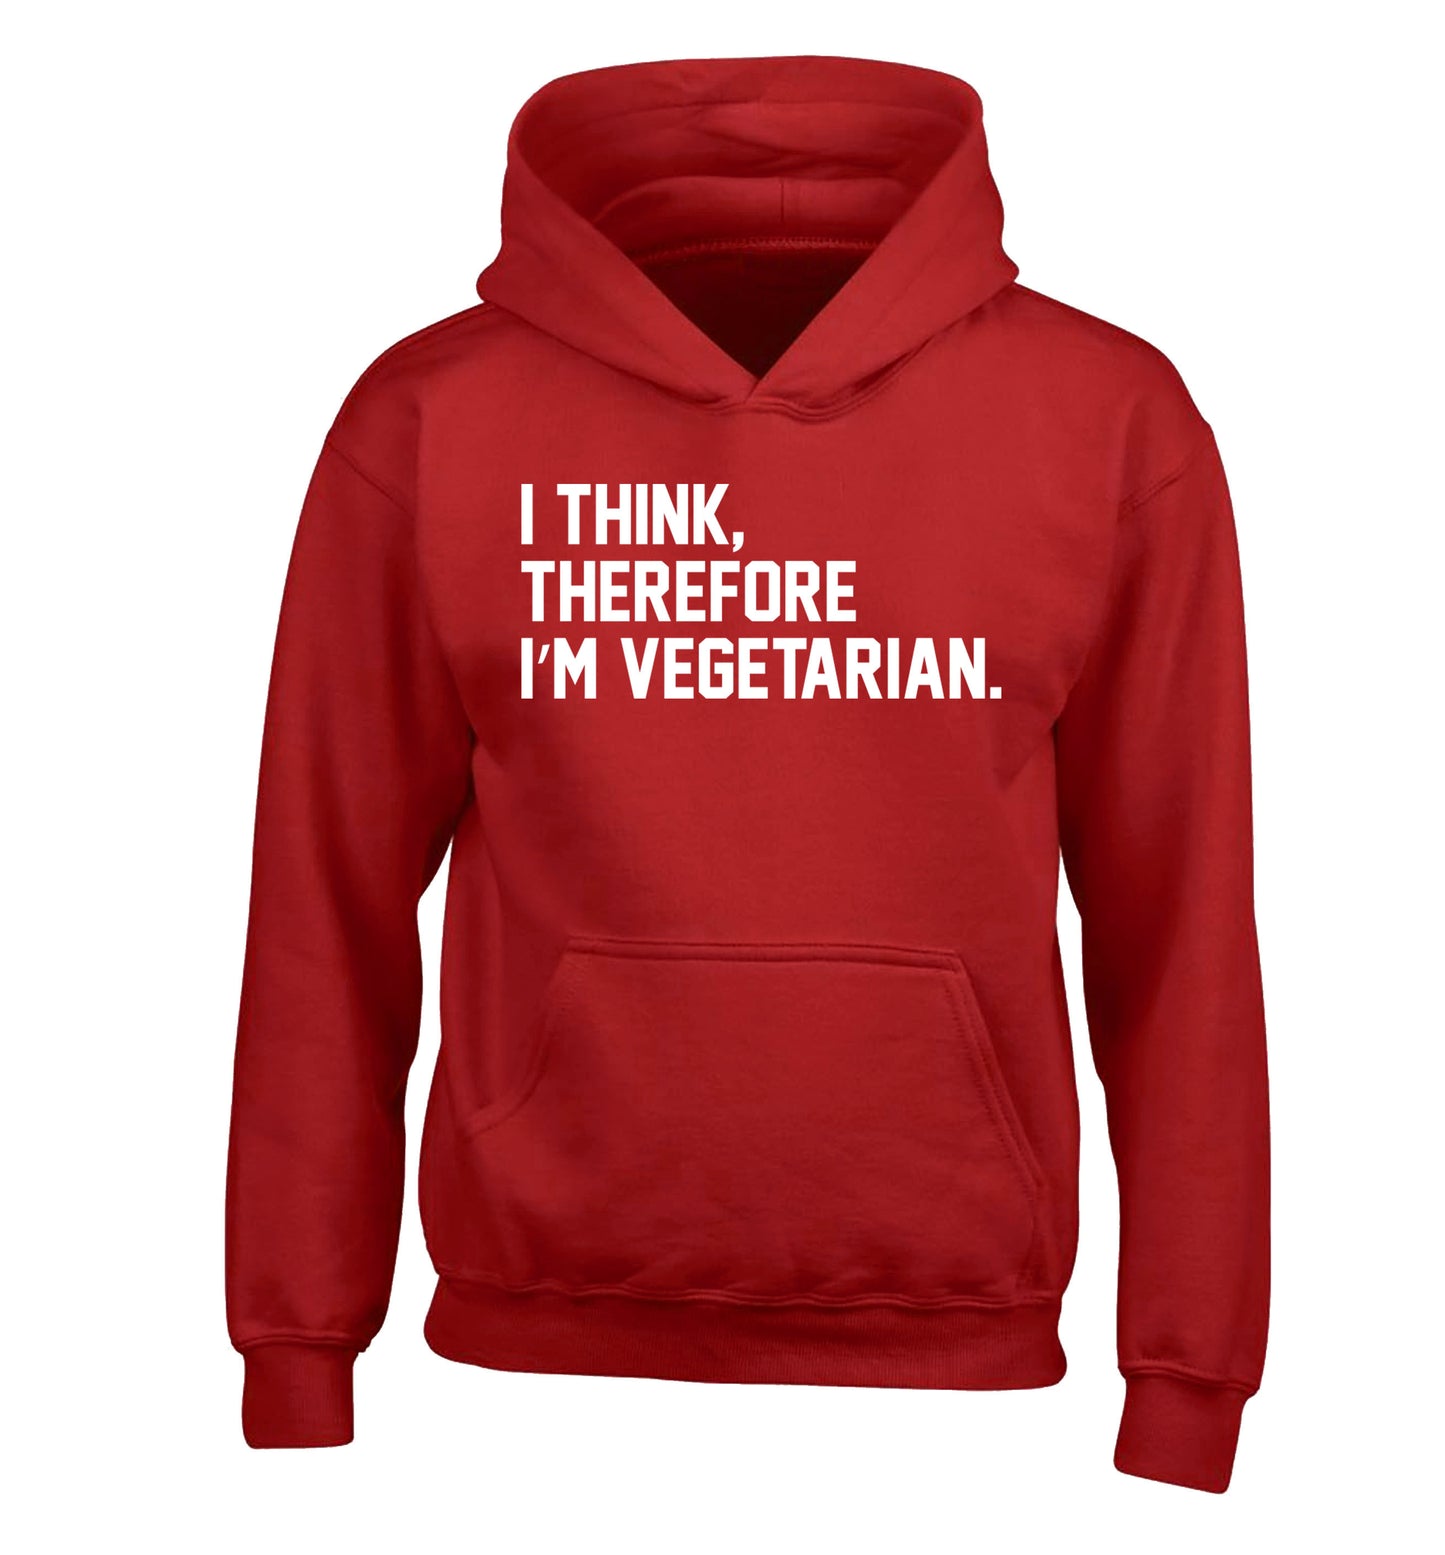 I think therefore I'm vegetarian children's red hoodie 12-14 Years